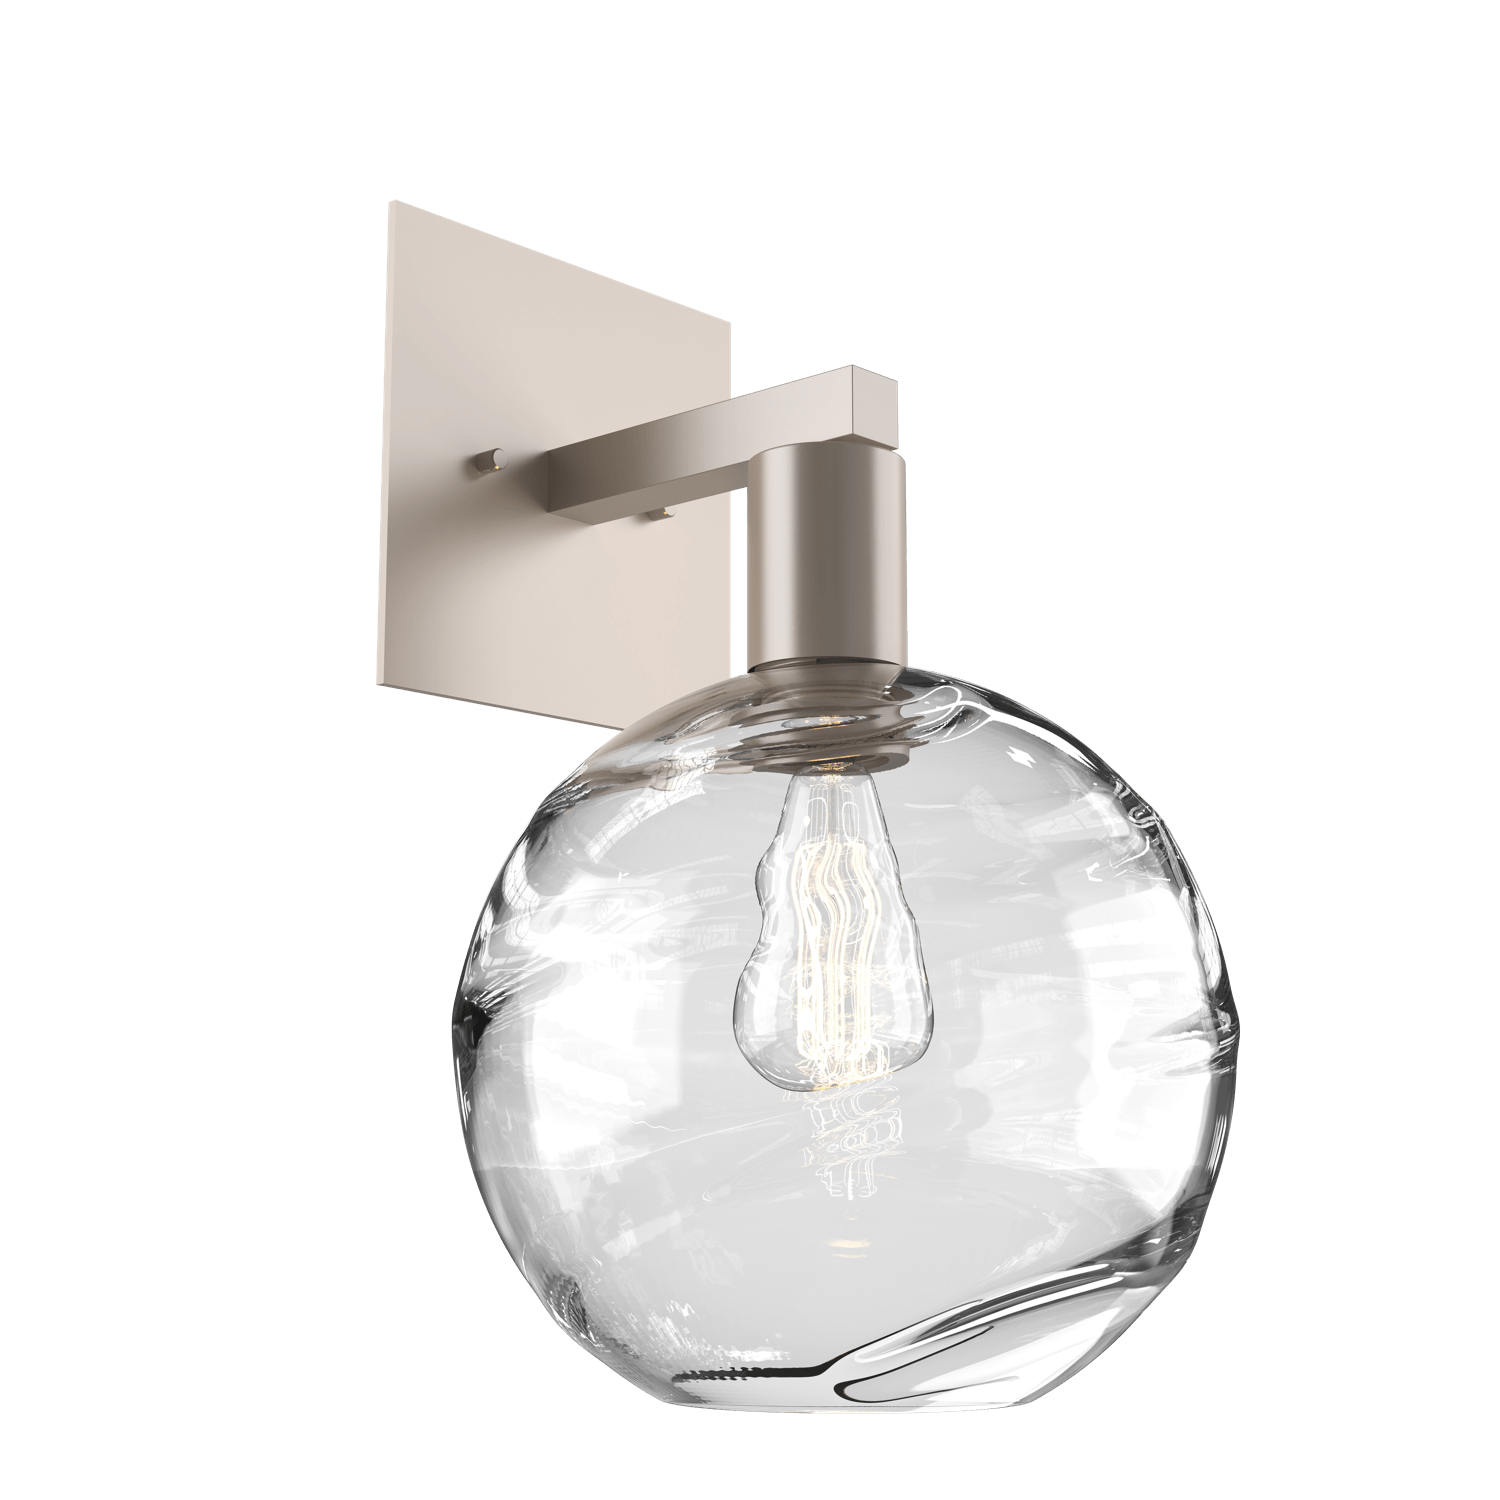 IDB0047-14-BS-OC-Hammerton-Studio-Optic-Blown-Glass-Terra-wall-sconce-with-metallic-beige-silver-finish-and-optic-clear-blown-glass-shades-and-incandescent-lamping